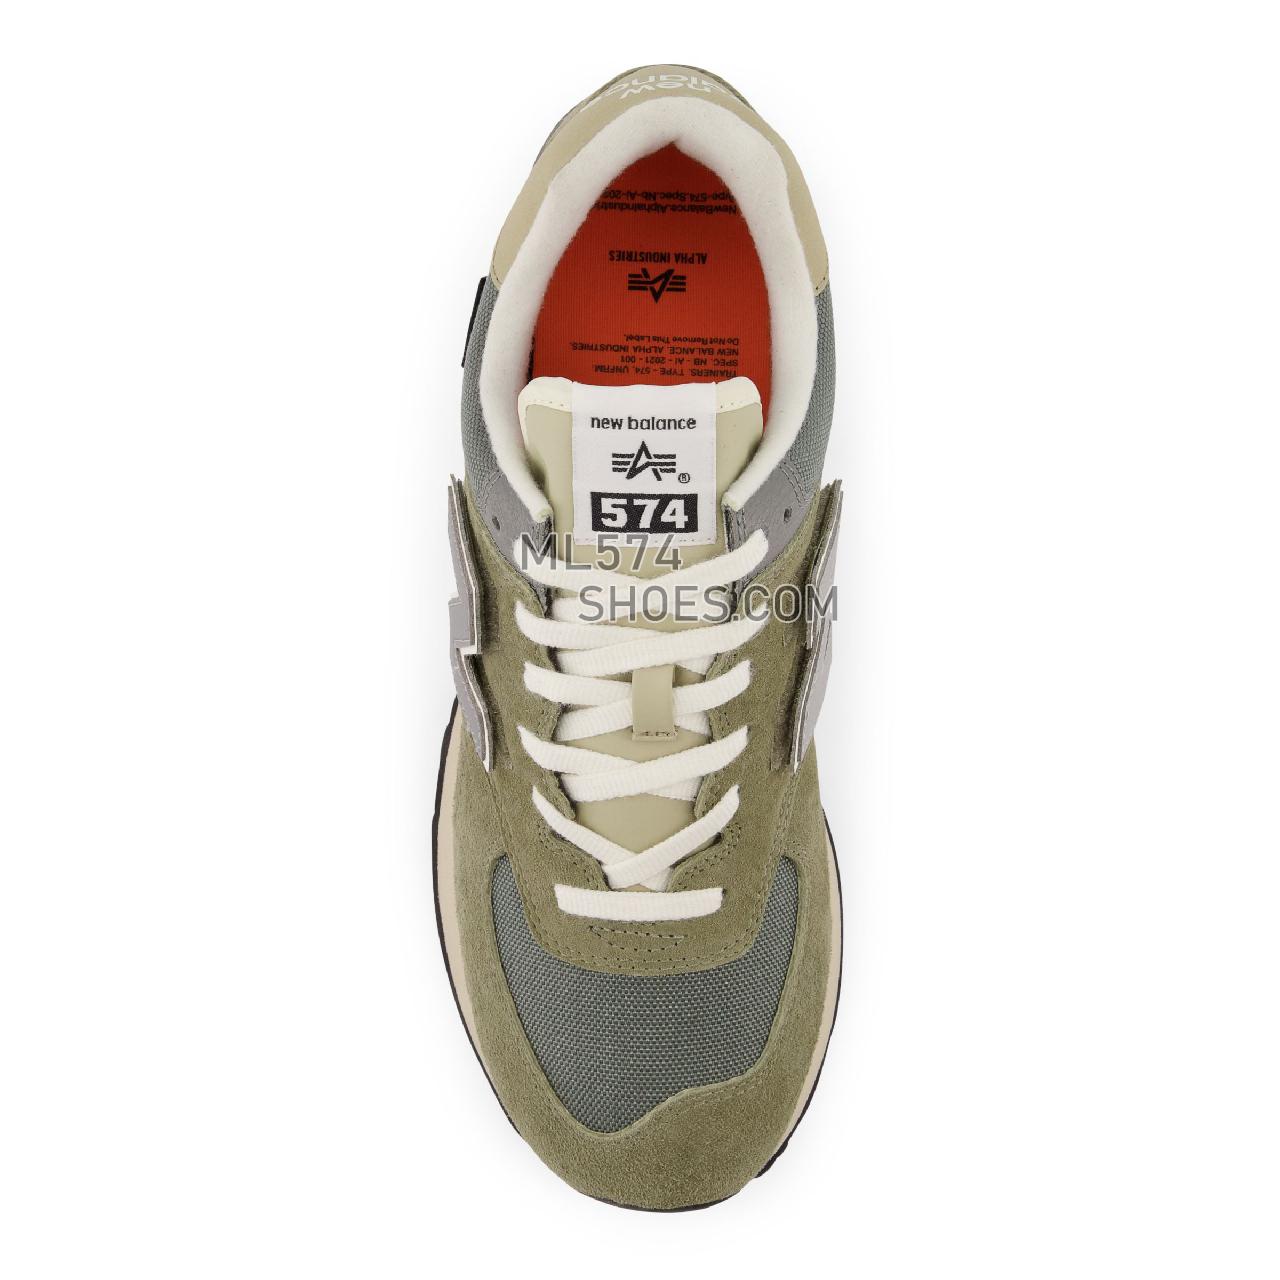 New Balance Alpha Industries 574v2 - Men's Classic Sneakers - Vetiver with Sedona Sage and Covert Green - ML574AI2